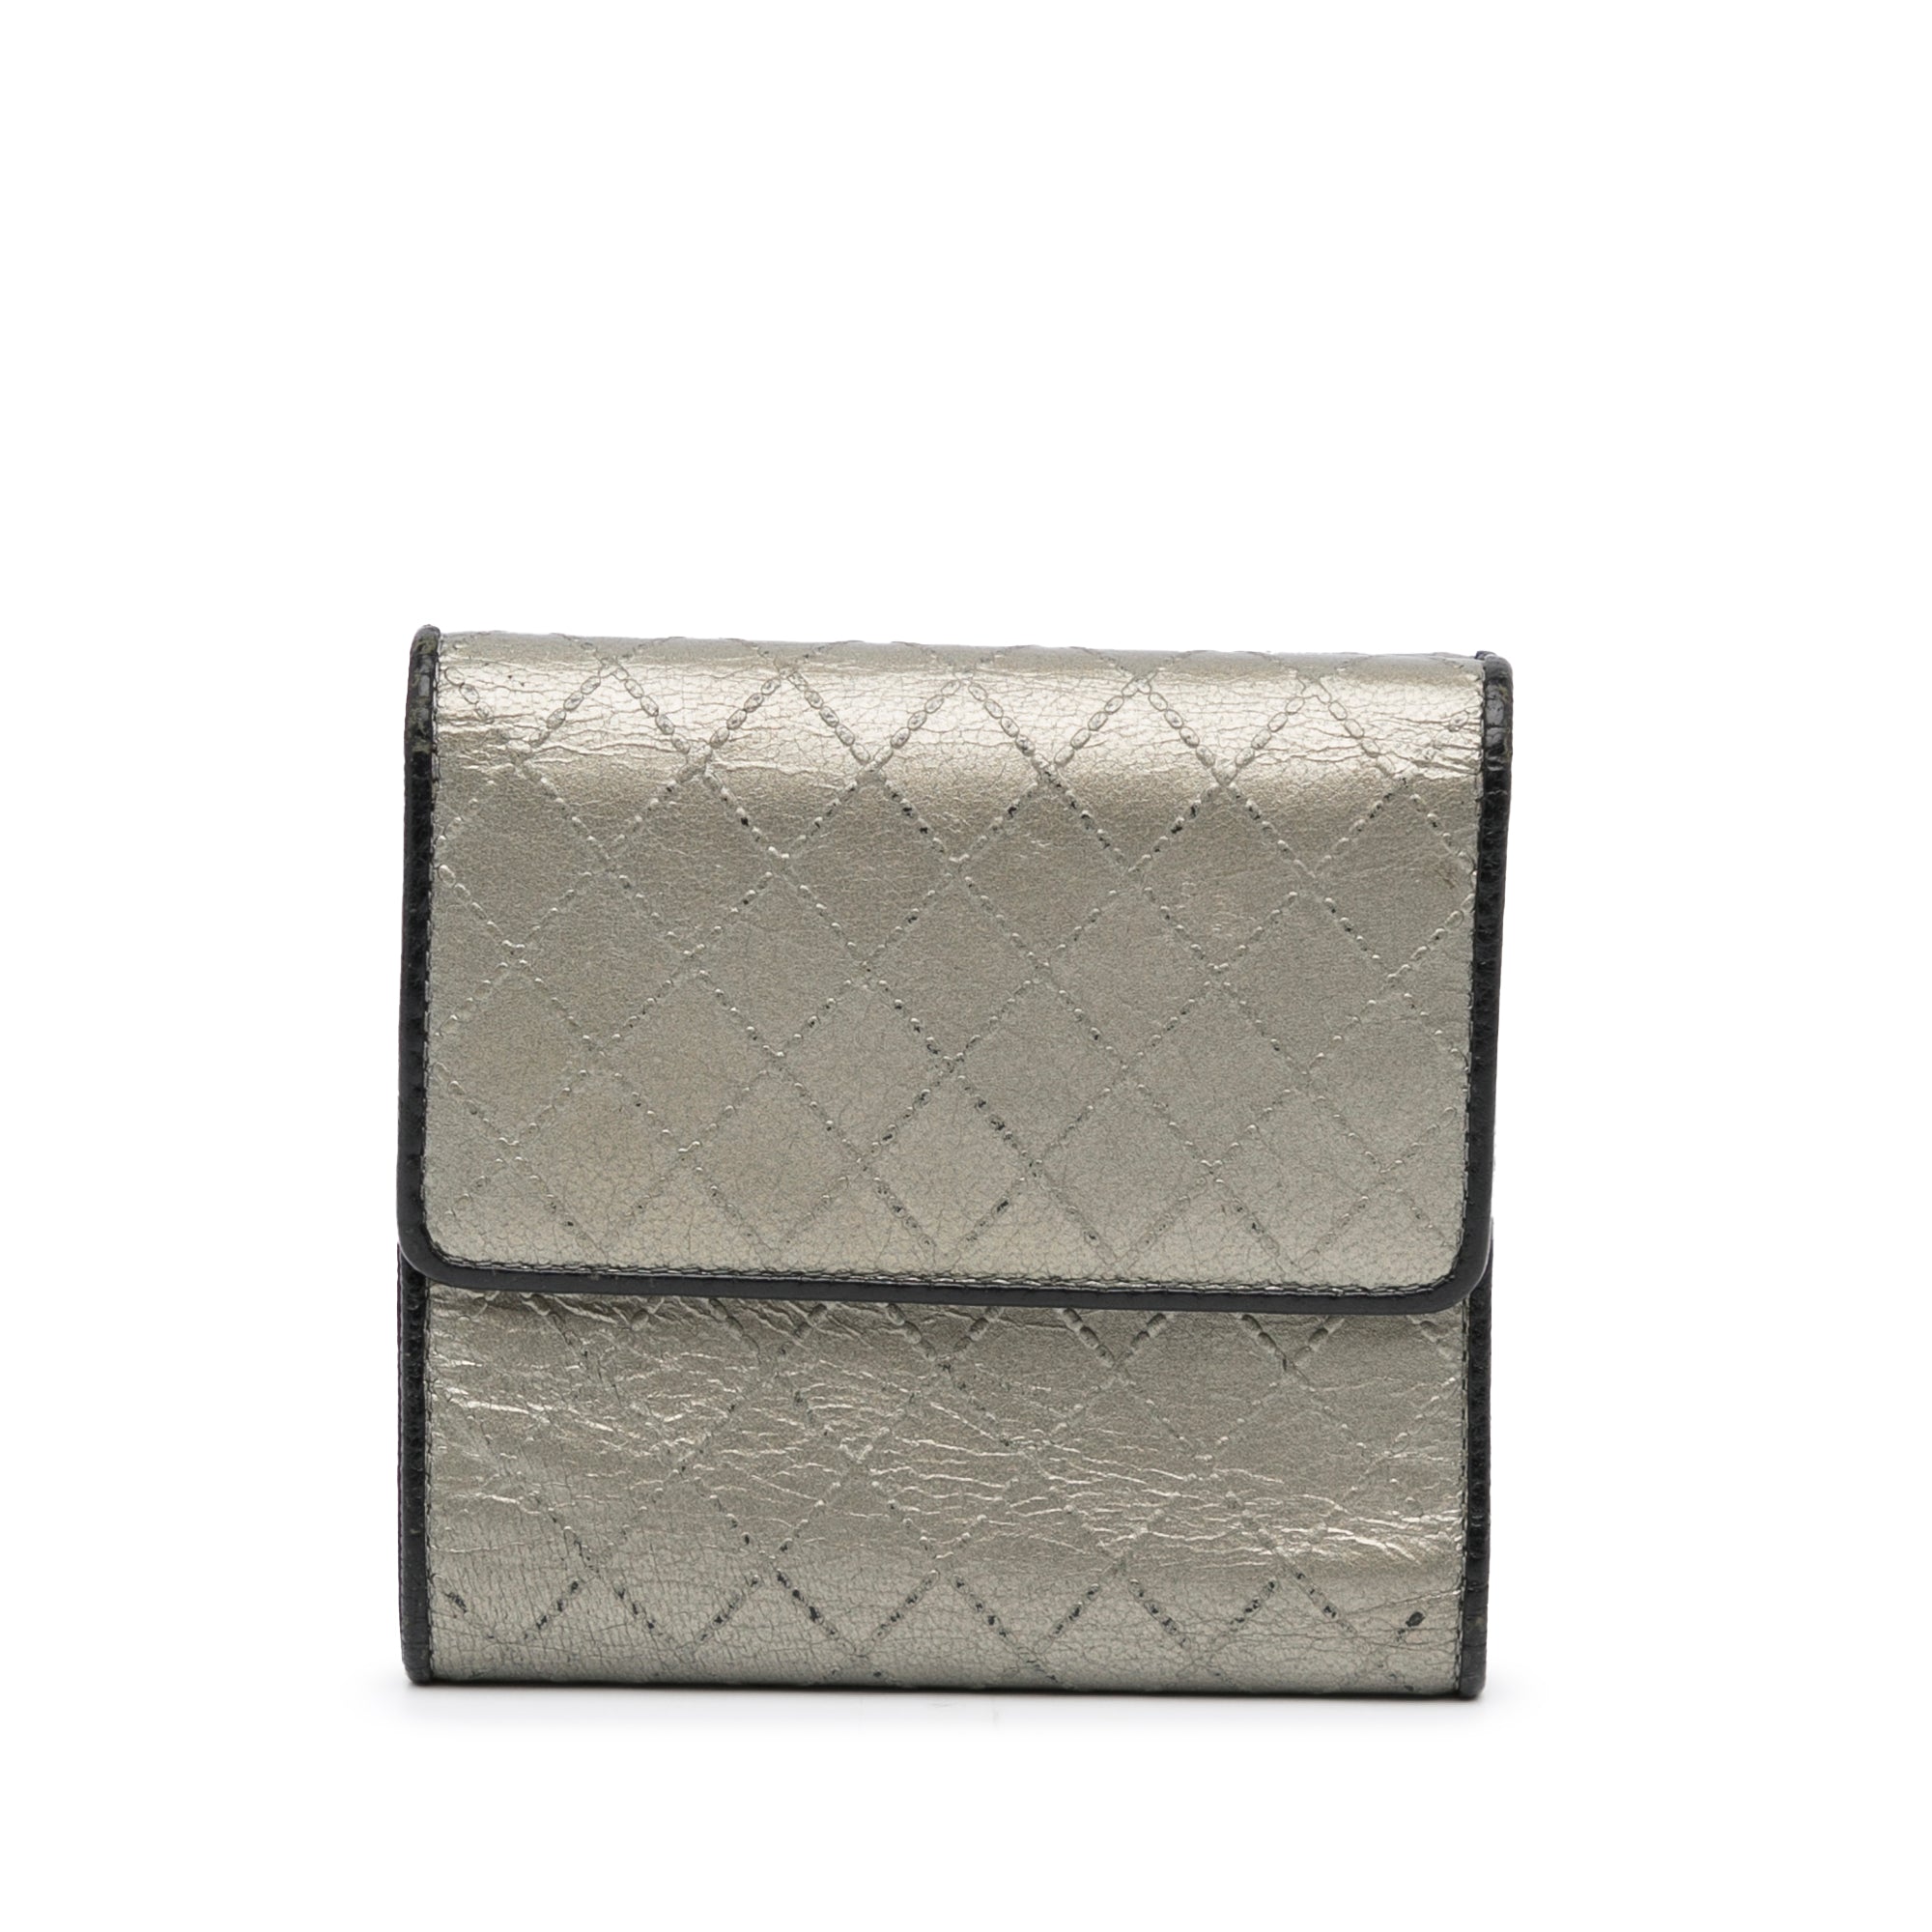 Silver Chanel CC Compact Trifold Wallet – Designer Revival